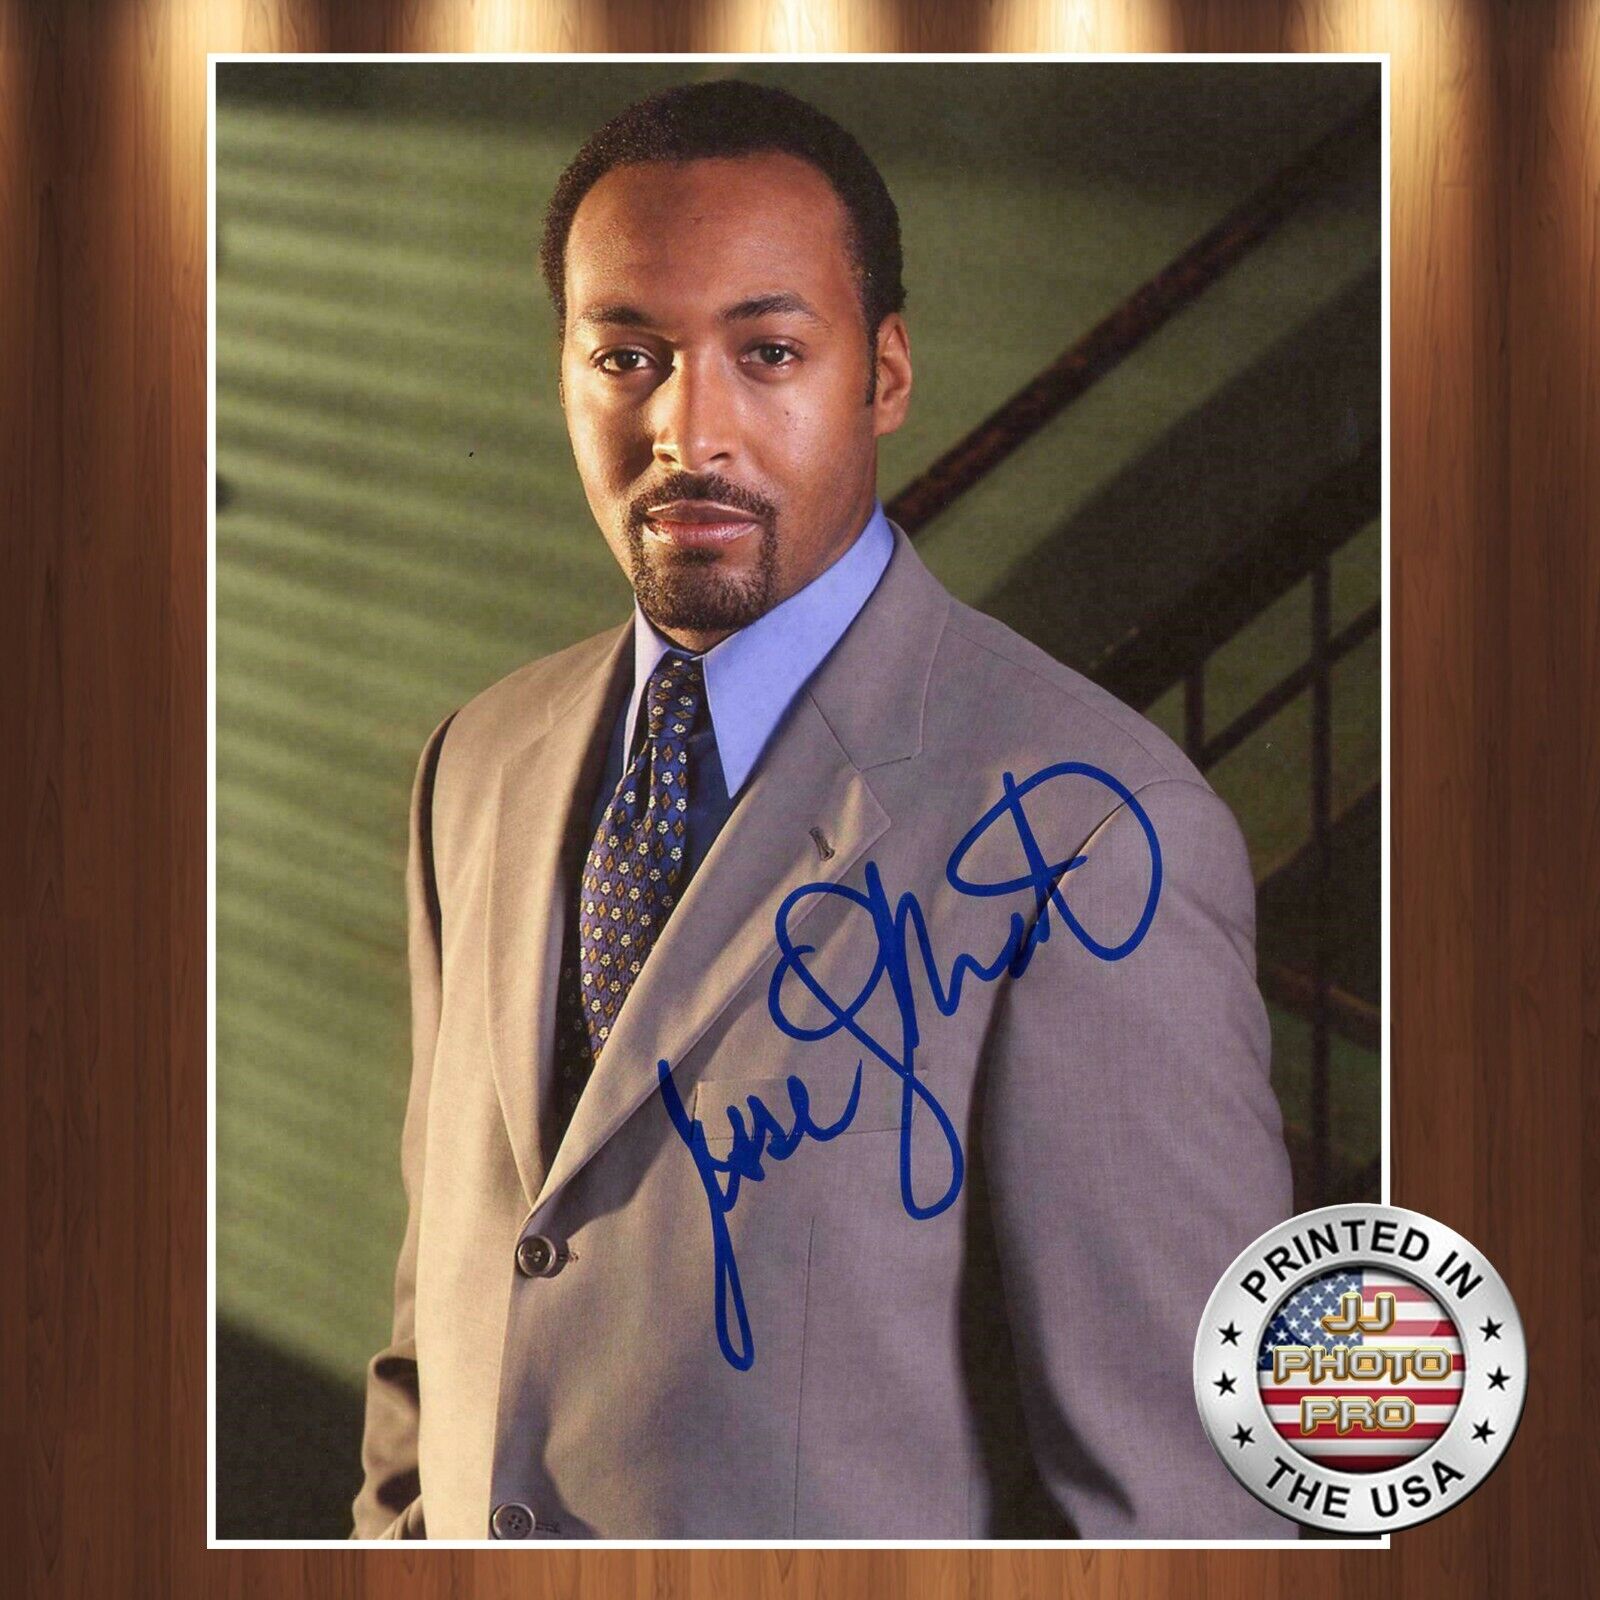 Jesse L Martin Autographed Signed 8x10 Photo Poster painting (Law and Order) REPRINT